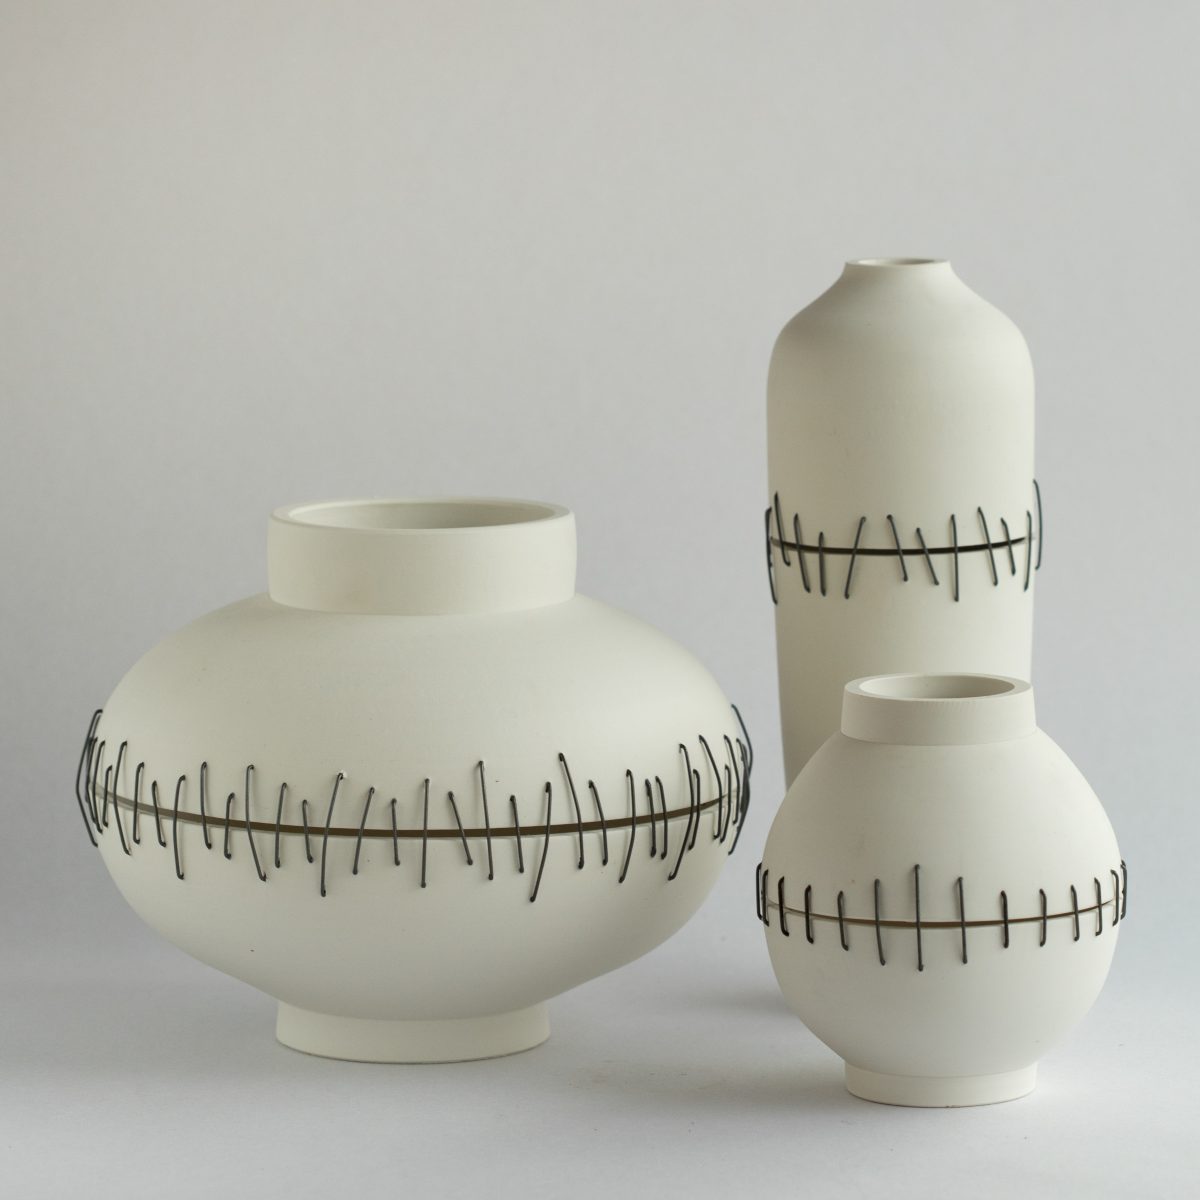 Previous Exploration of Materials such as Textiles, Metal and Wood Influence Current Ceramic Practices